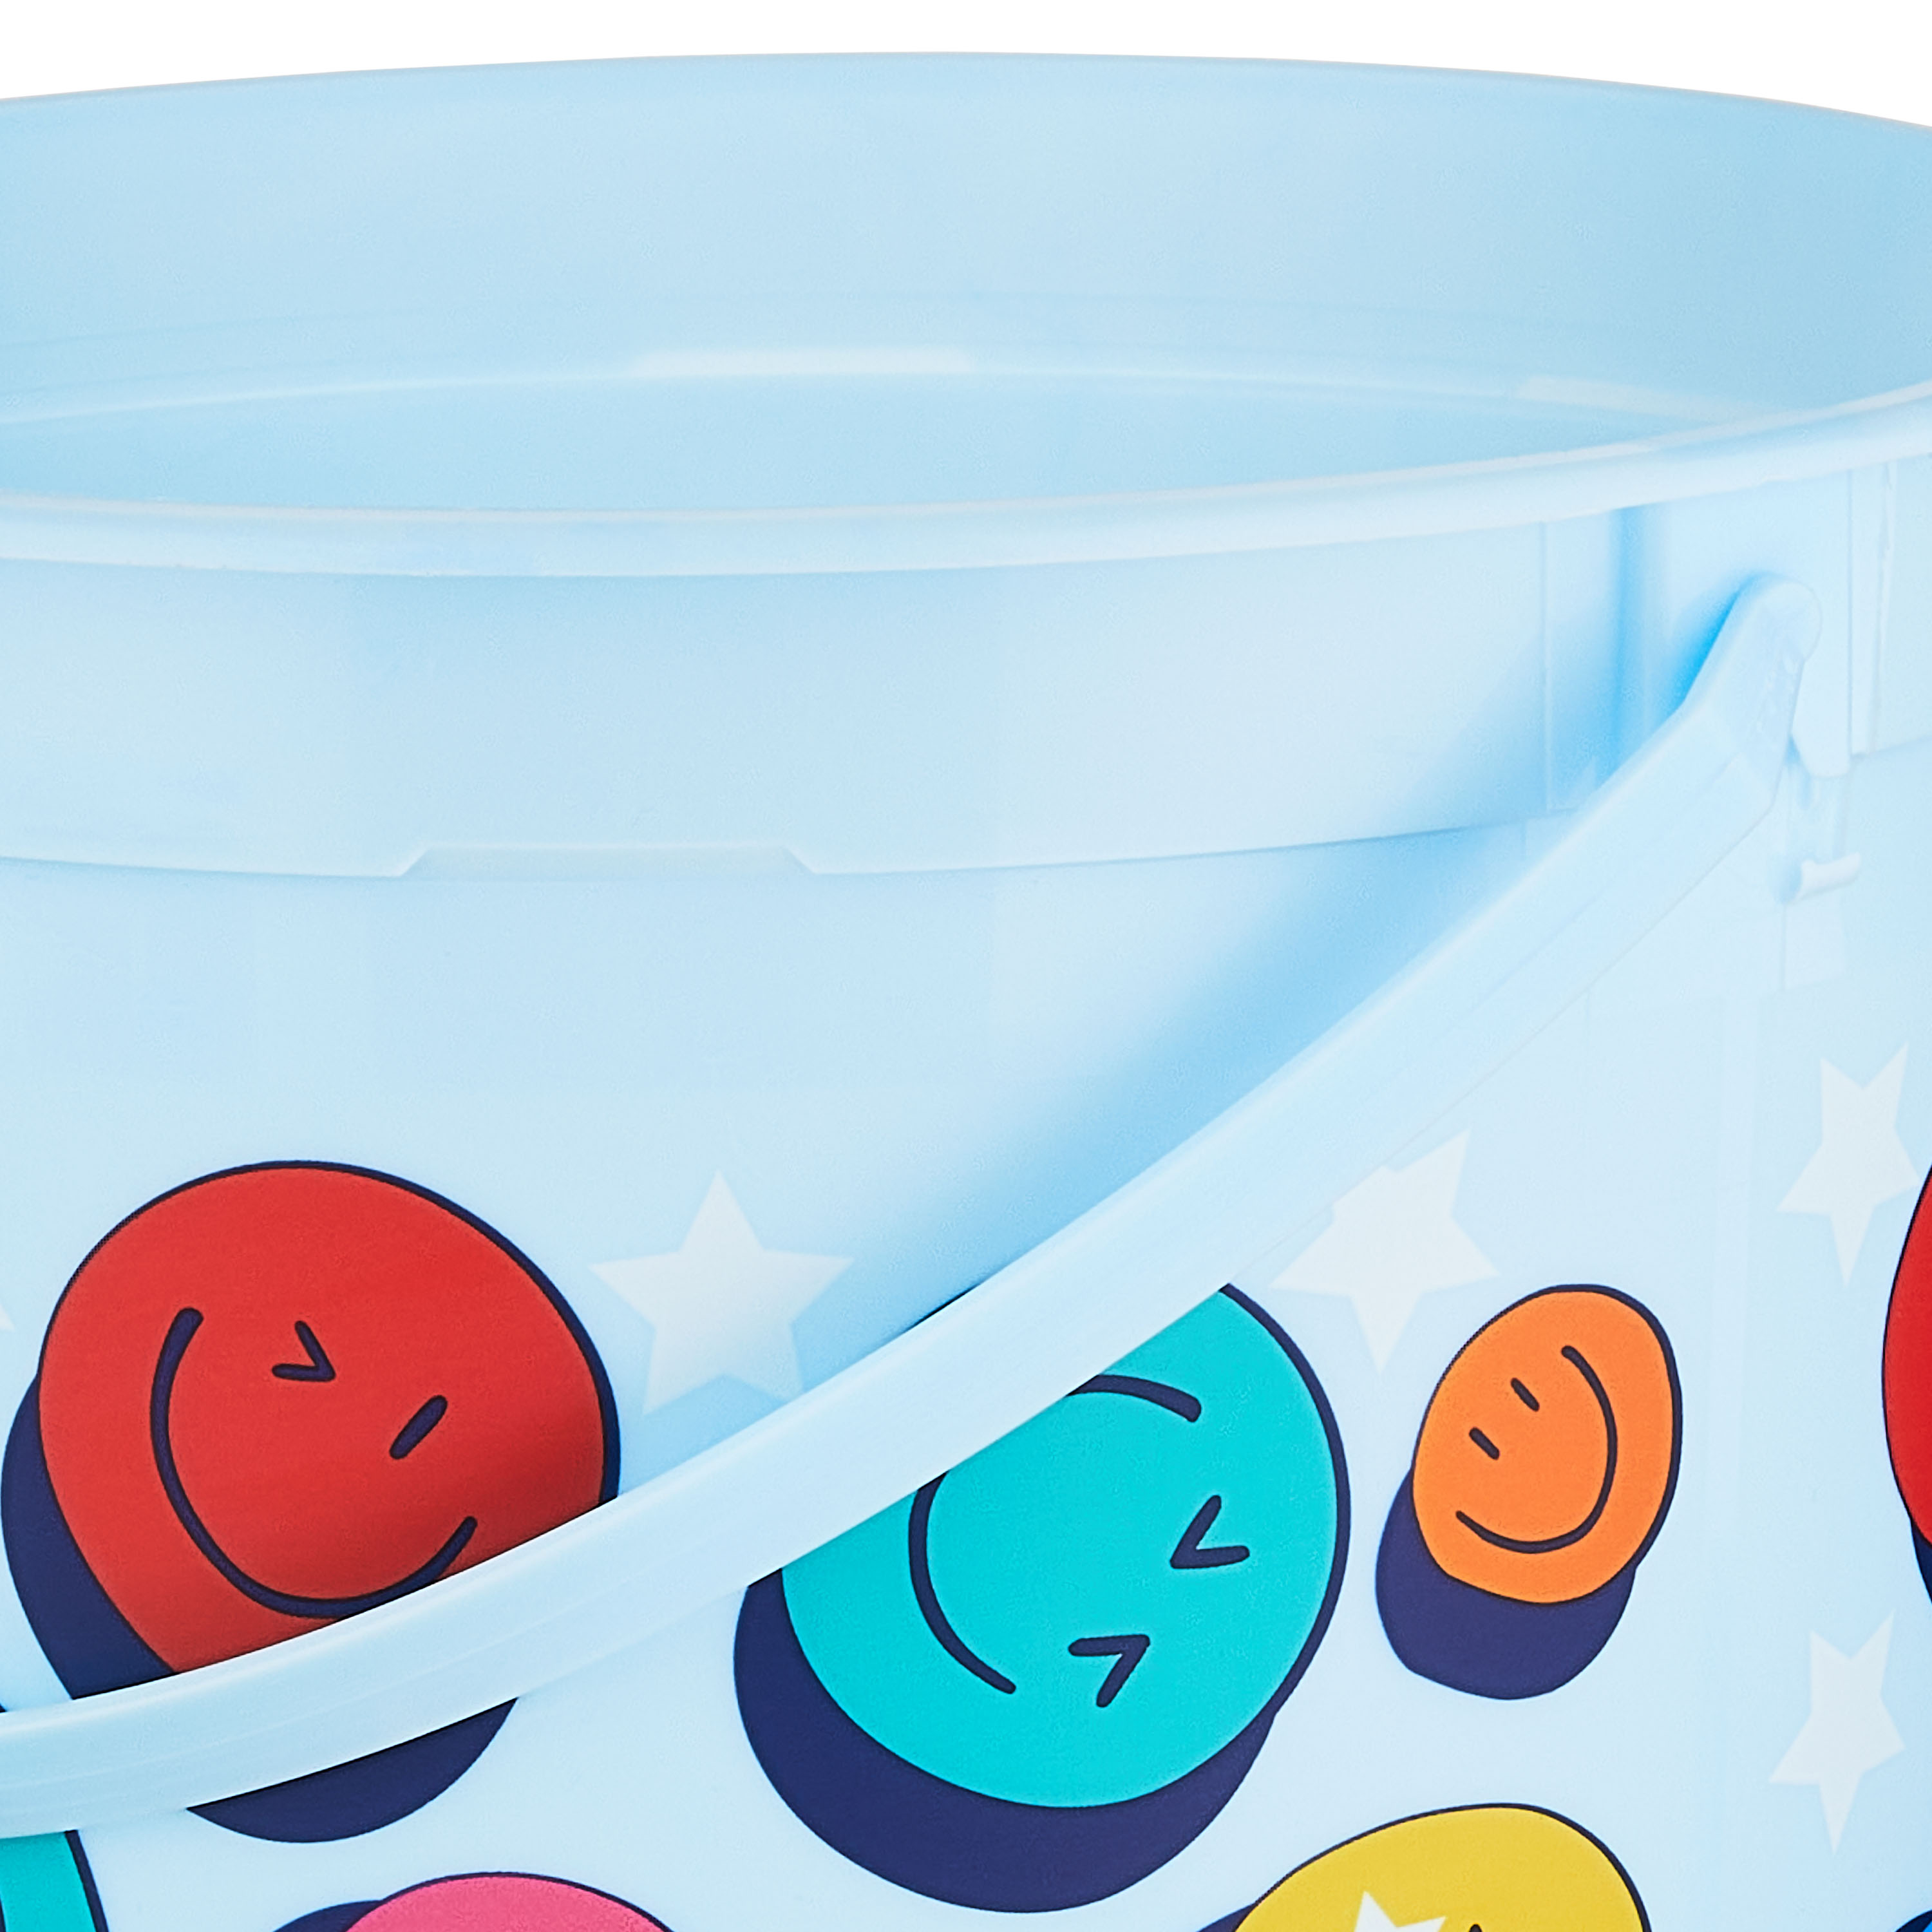 Easter 5-Quart Plastic Bucket, Blue Smileys, by Way To Celebrate - image 3 of 5